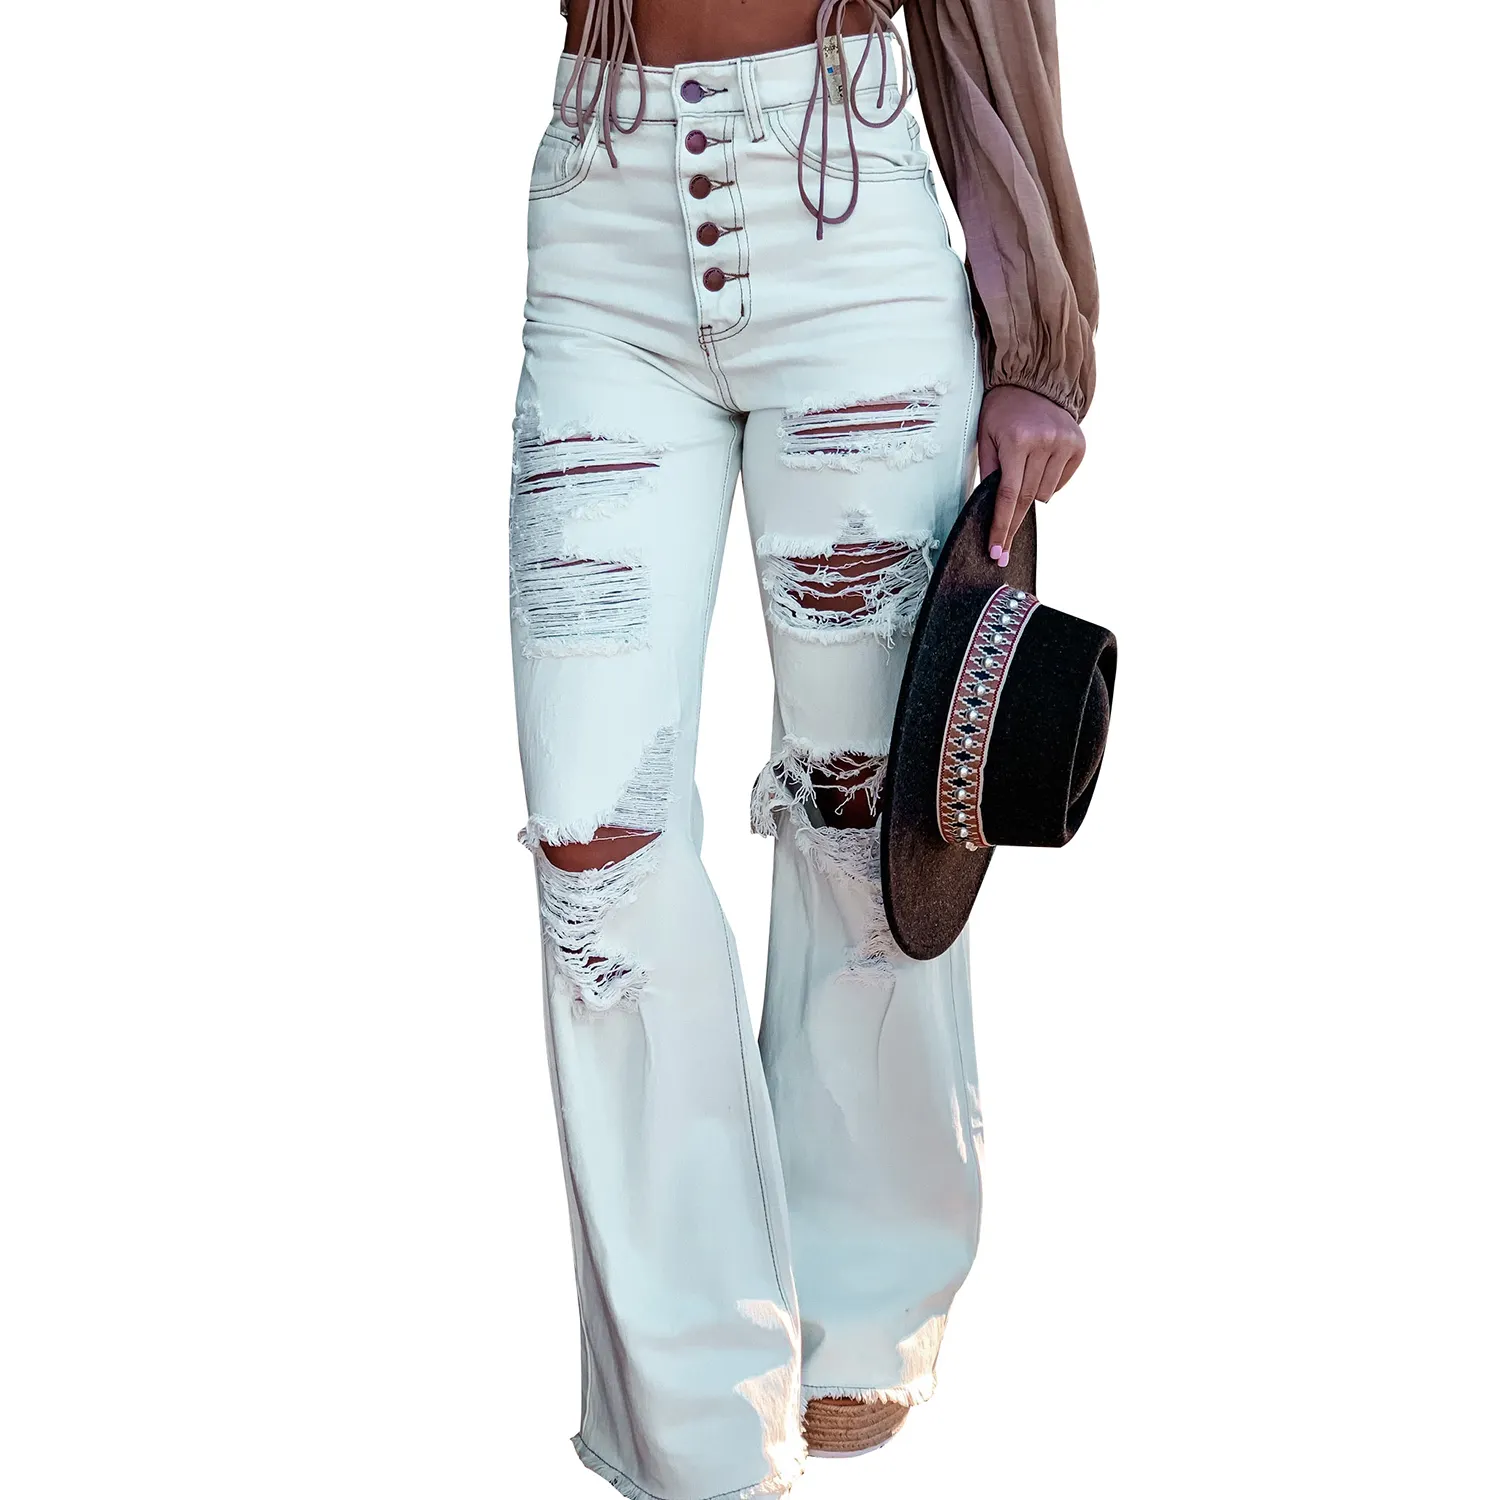 Fashion Flare Jeans Female Distressed High Waist Denim Pants White Ripped Jeans for Women